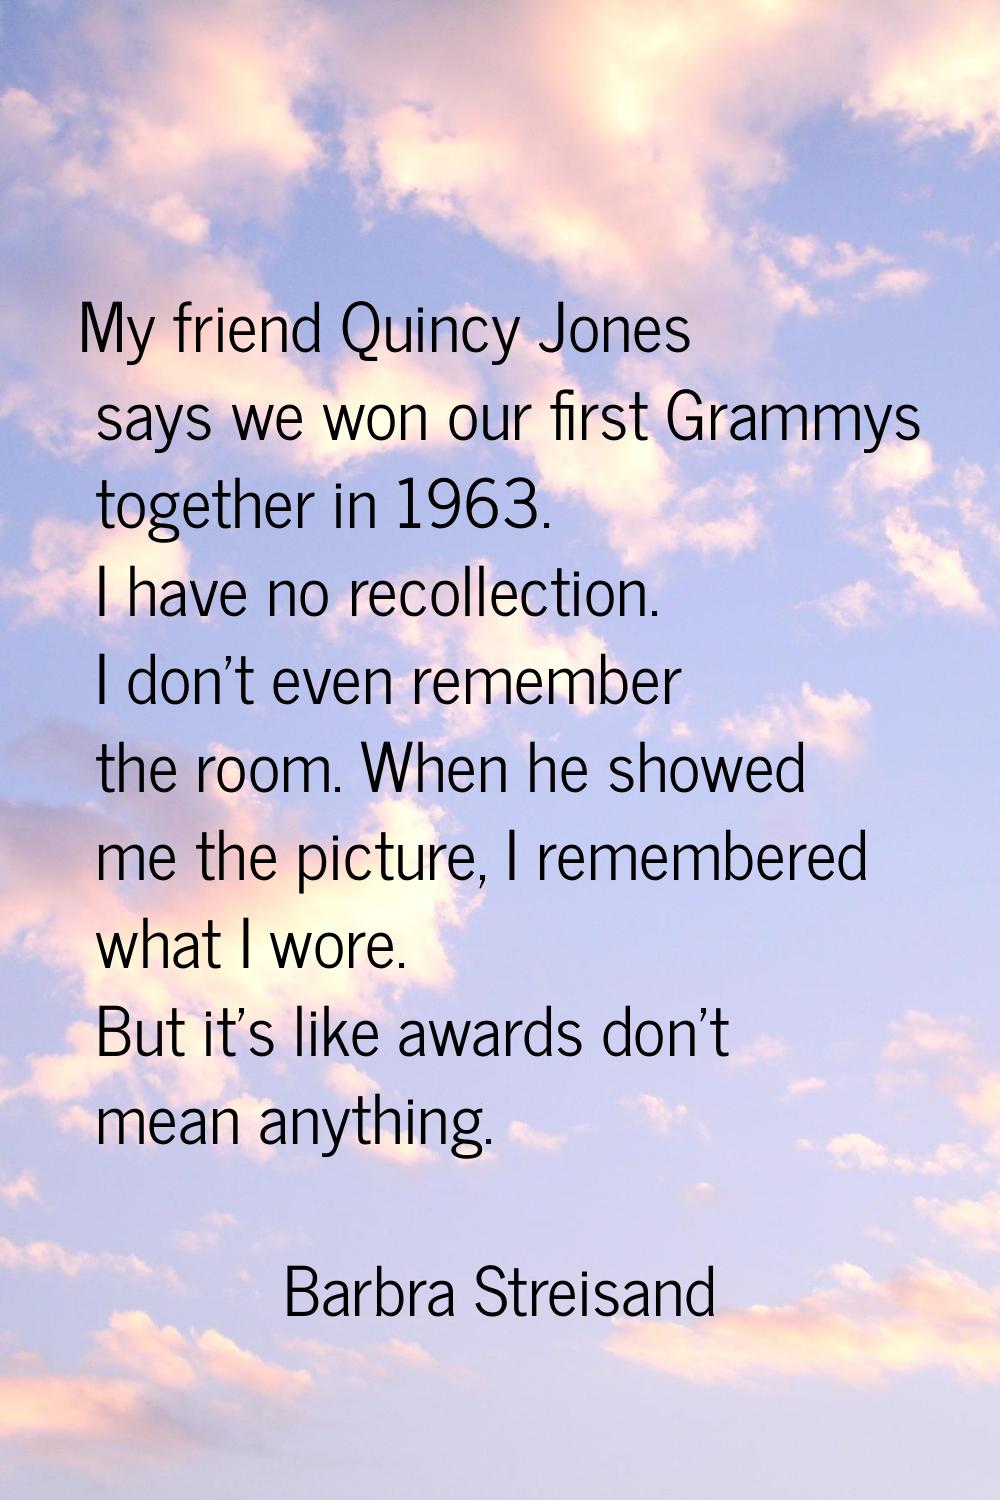 My friend Quincy Jones says we won our first Grammys together in 1963. I have no recollection. I do